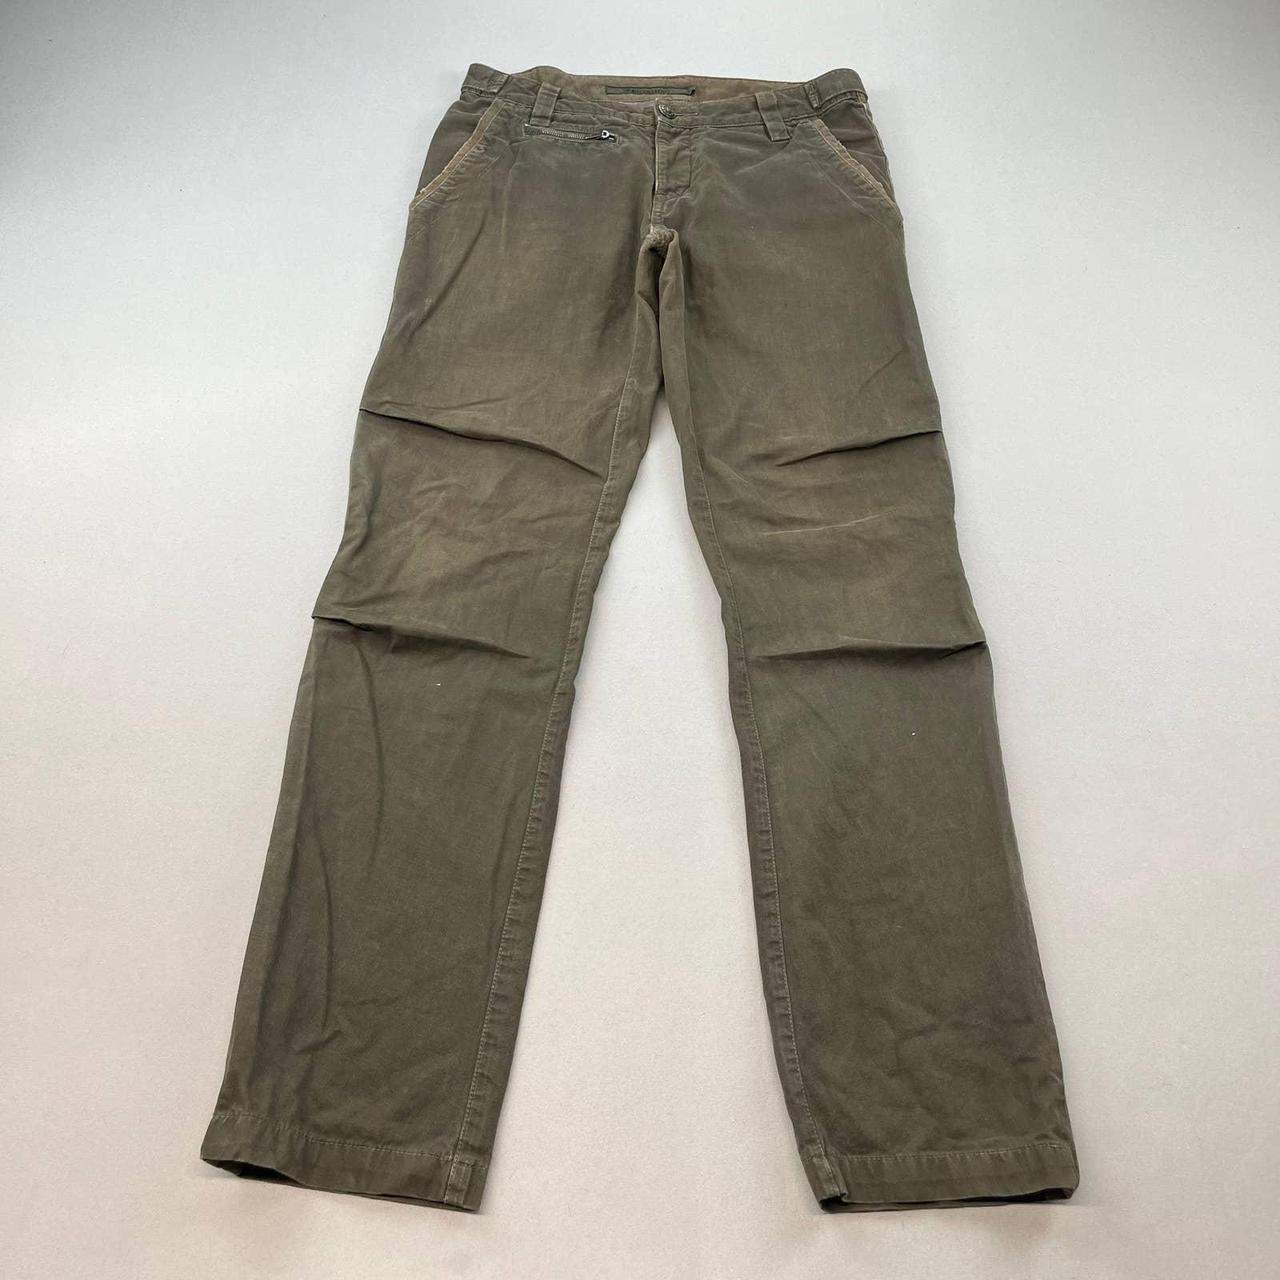 Product Image 1 - Vintage Nice Collective Pants Mens